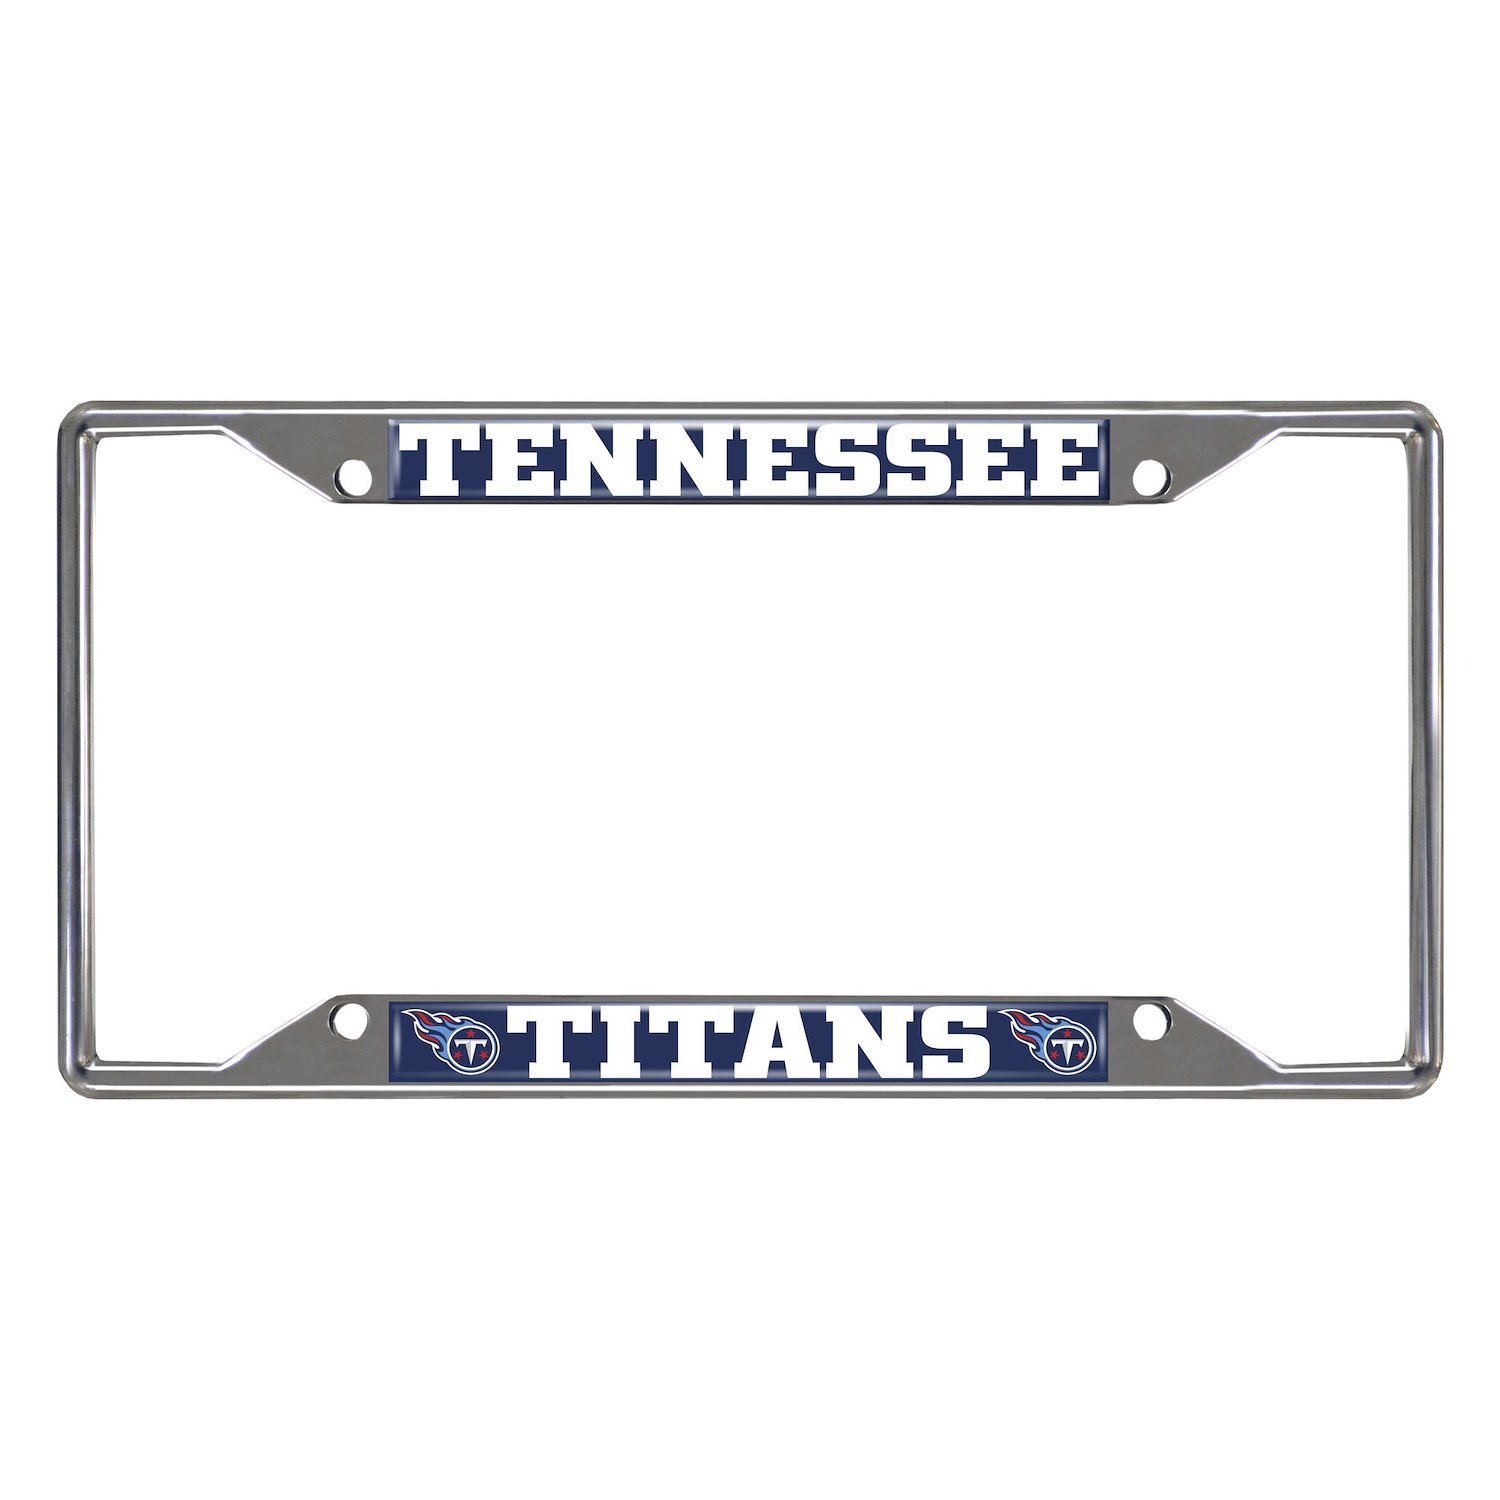 21391 Chrome-Metal License Plate Frame, 6.25 in. x 12.25 in., Tennessee Titans [Blue Logo]